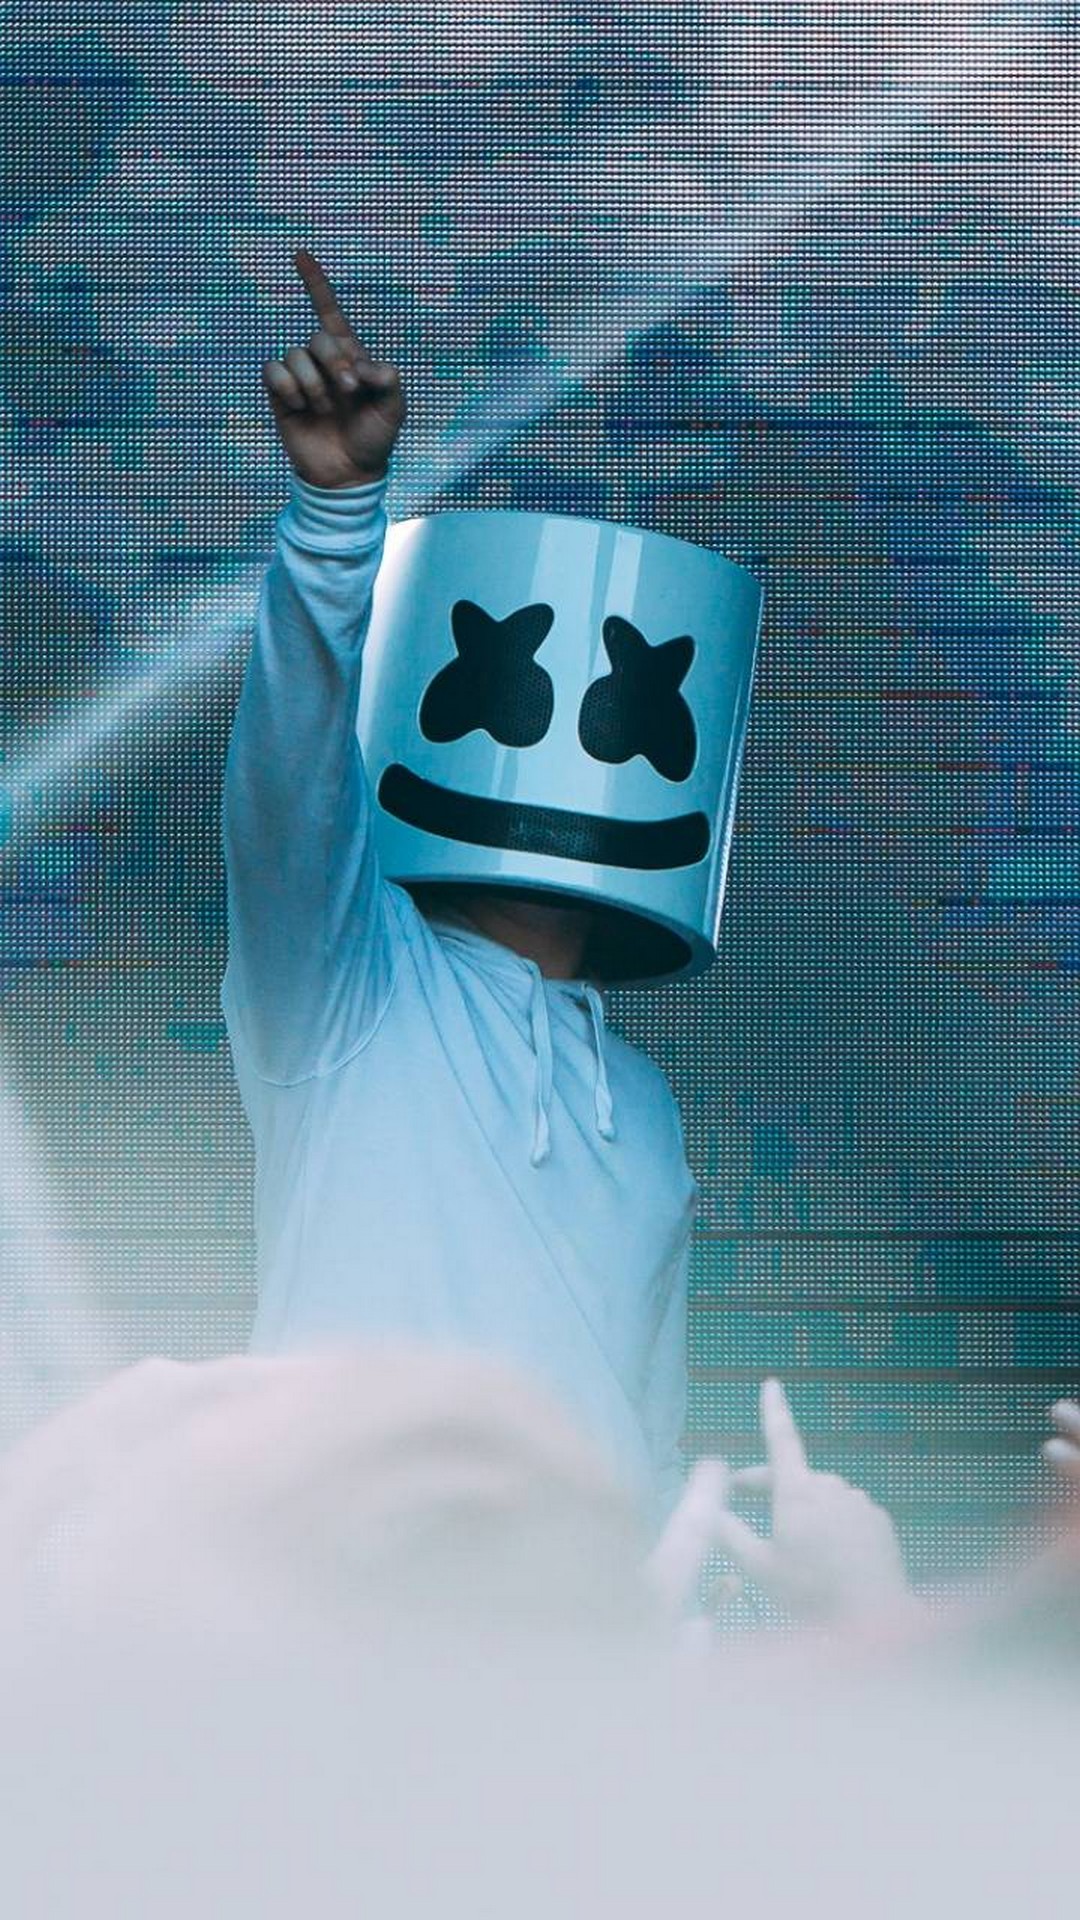 Marshmello Wallpaper for iPhone with high-resolution 1080x1920 pixel. You can use this wallpaper for your iPhone 5, 6, 7, 8, X, XS, XR backgrounds, Mobile Screensaver, or iPad Lock Screen